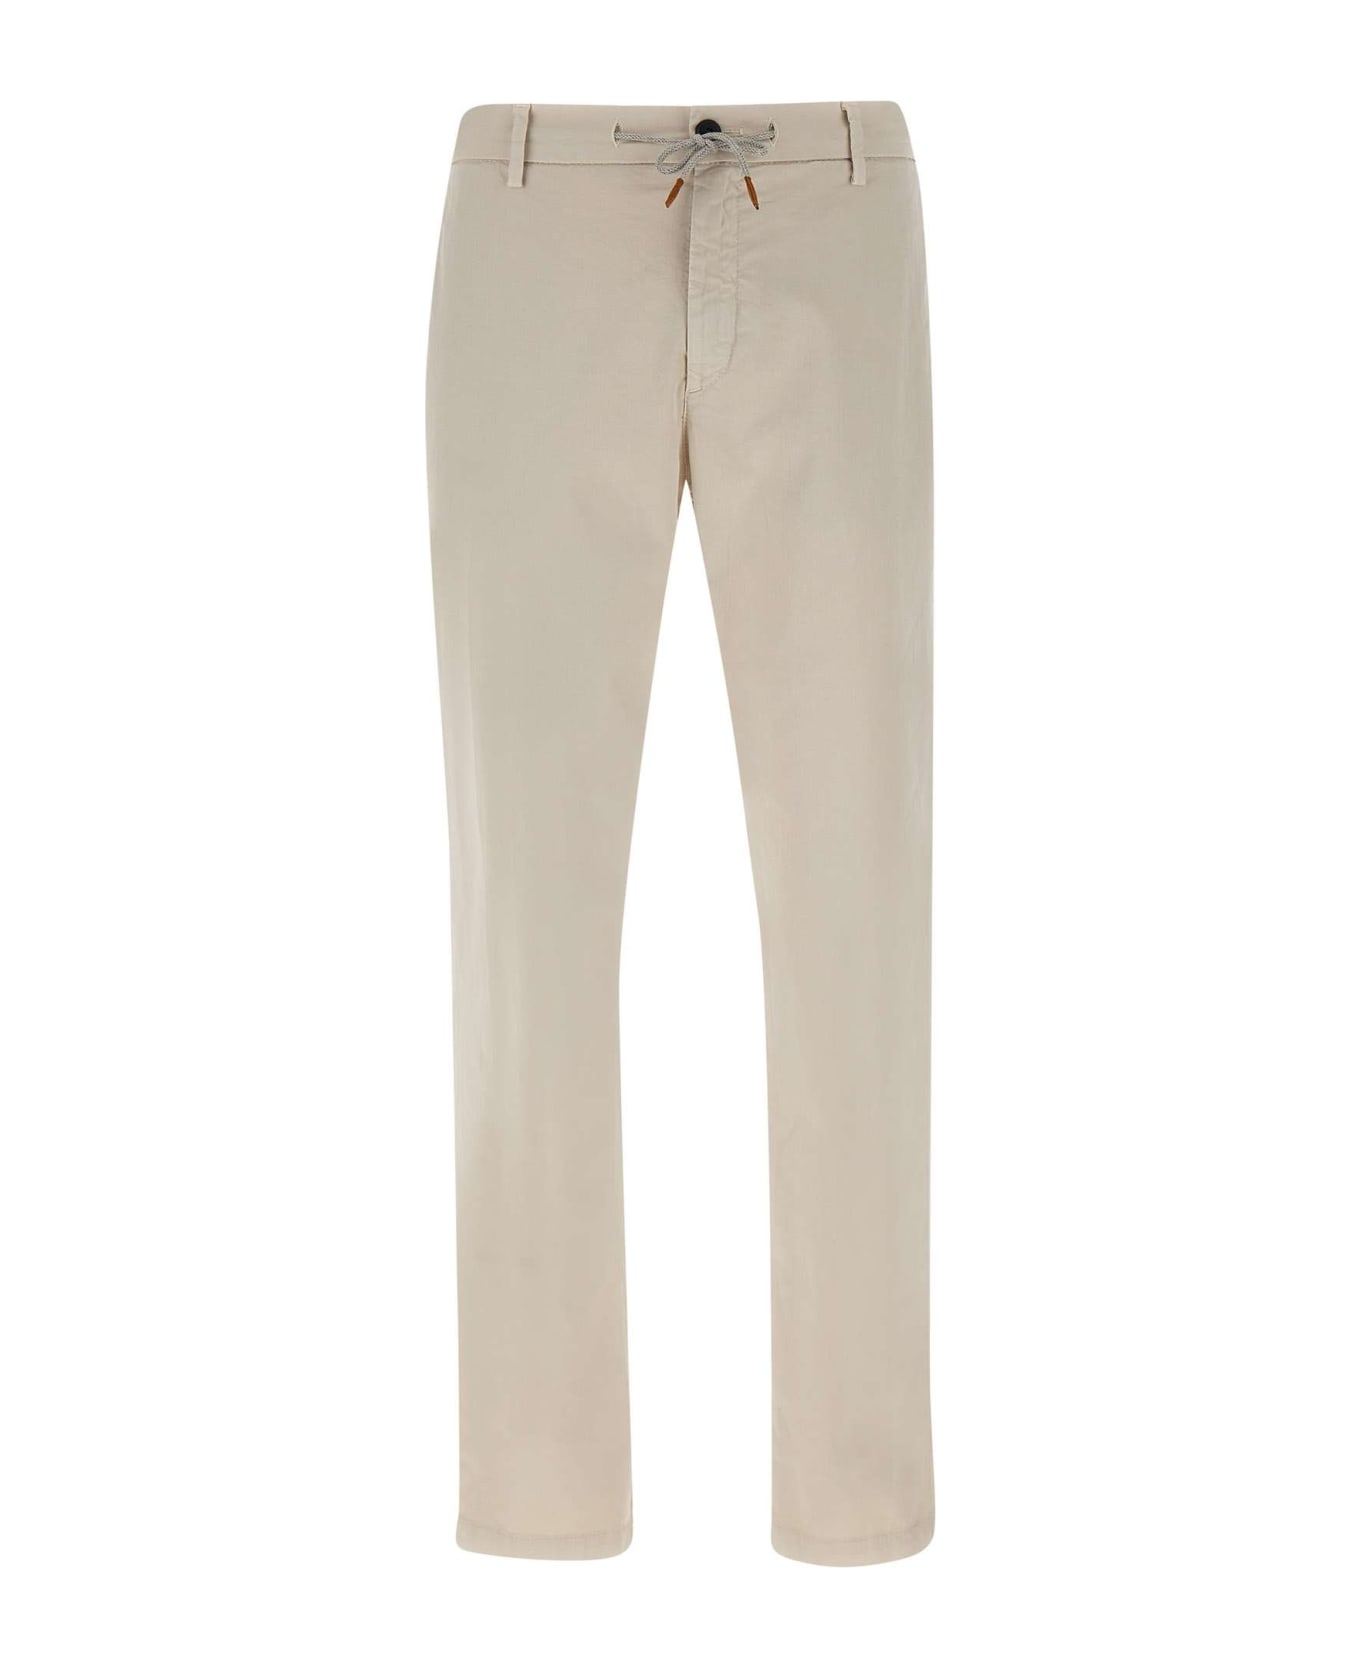 Eleventy Stretch Cotton Trousers - BEIGE ボトムス